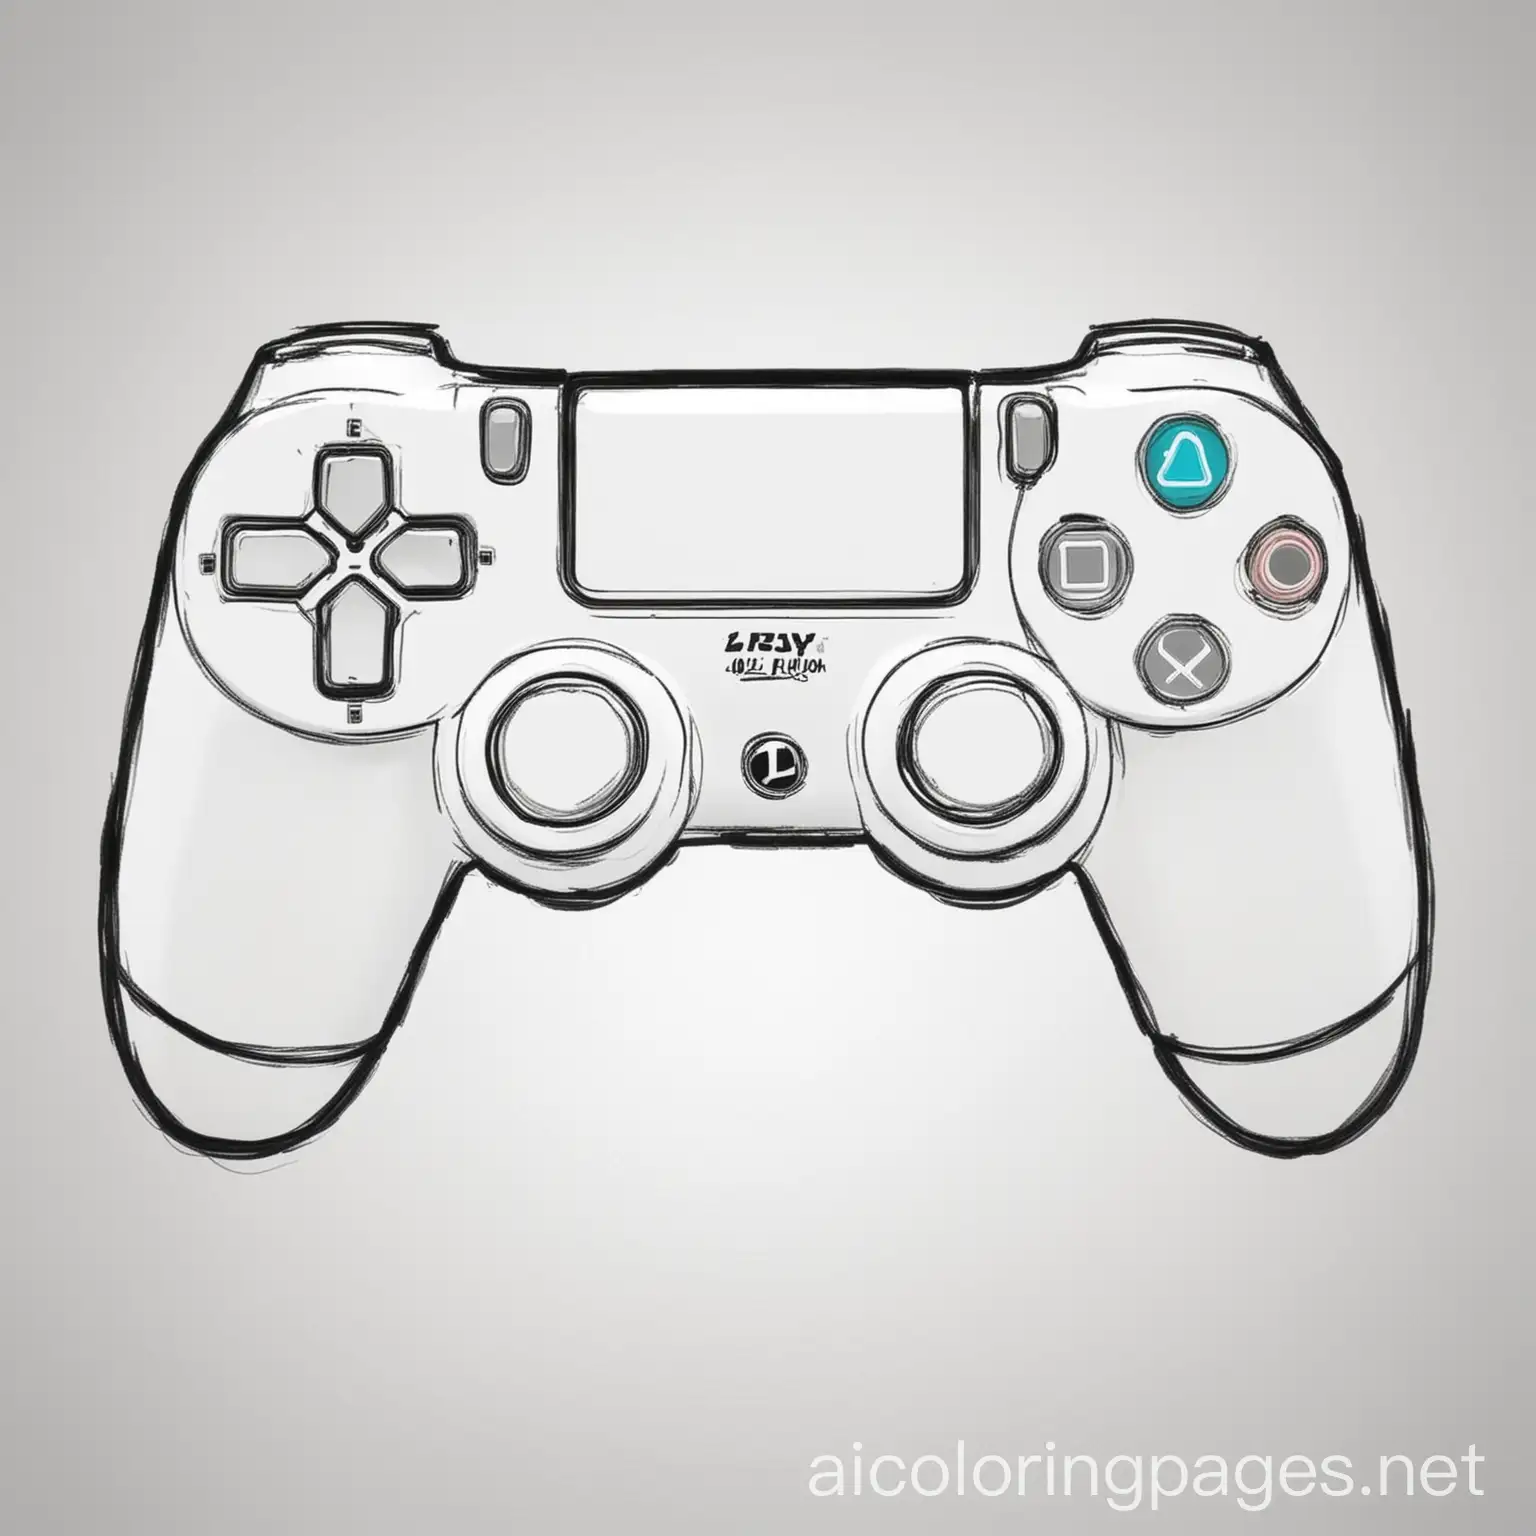 a playstation 4 controler coloring image
, Coloring Page, black and white, line art, white background, Simplicity, Ample White Space. The background of the coloring page is plain white to make it easy for young children to color within the lines. The outlines of all the subjects are easy to distinguish, making it simple for kids to color without too much difficulty